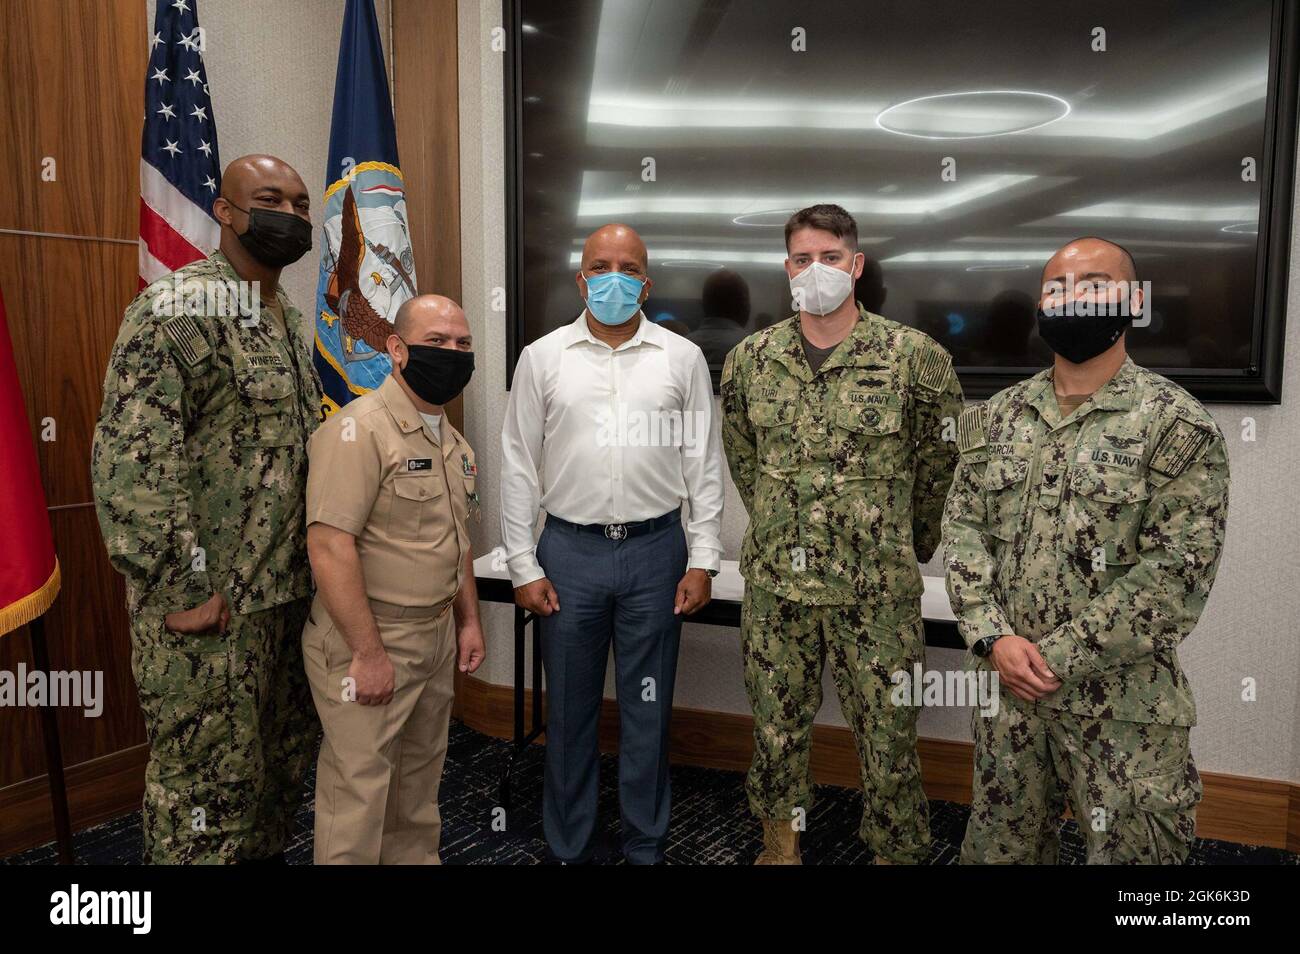 WASHINGTON, DC (Aug. 16, 2021) – Chief Navy Counselor Eduardo Rivera (center-left) poses with his colleagues following an award ceremony held onboard Washington Navy Yard. Stock Photo